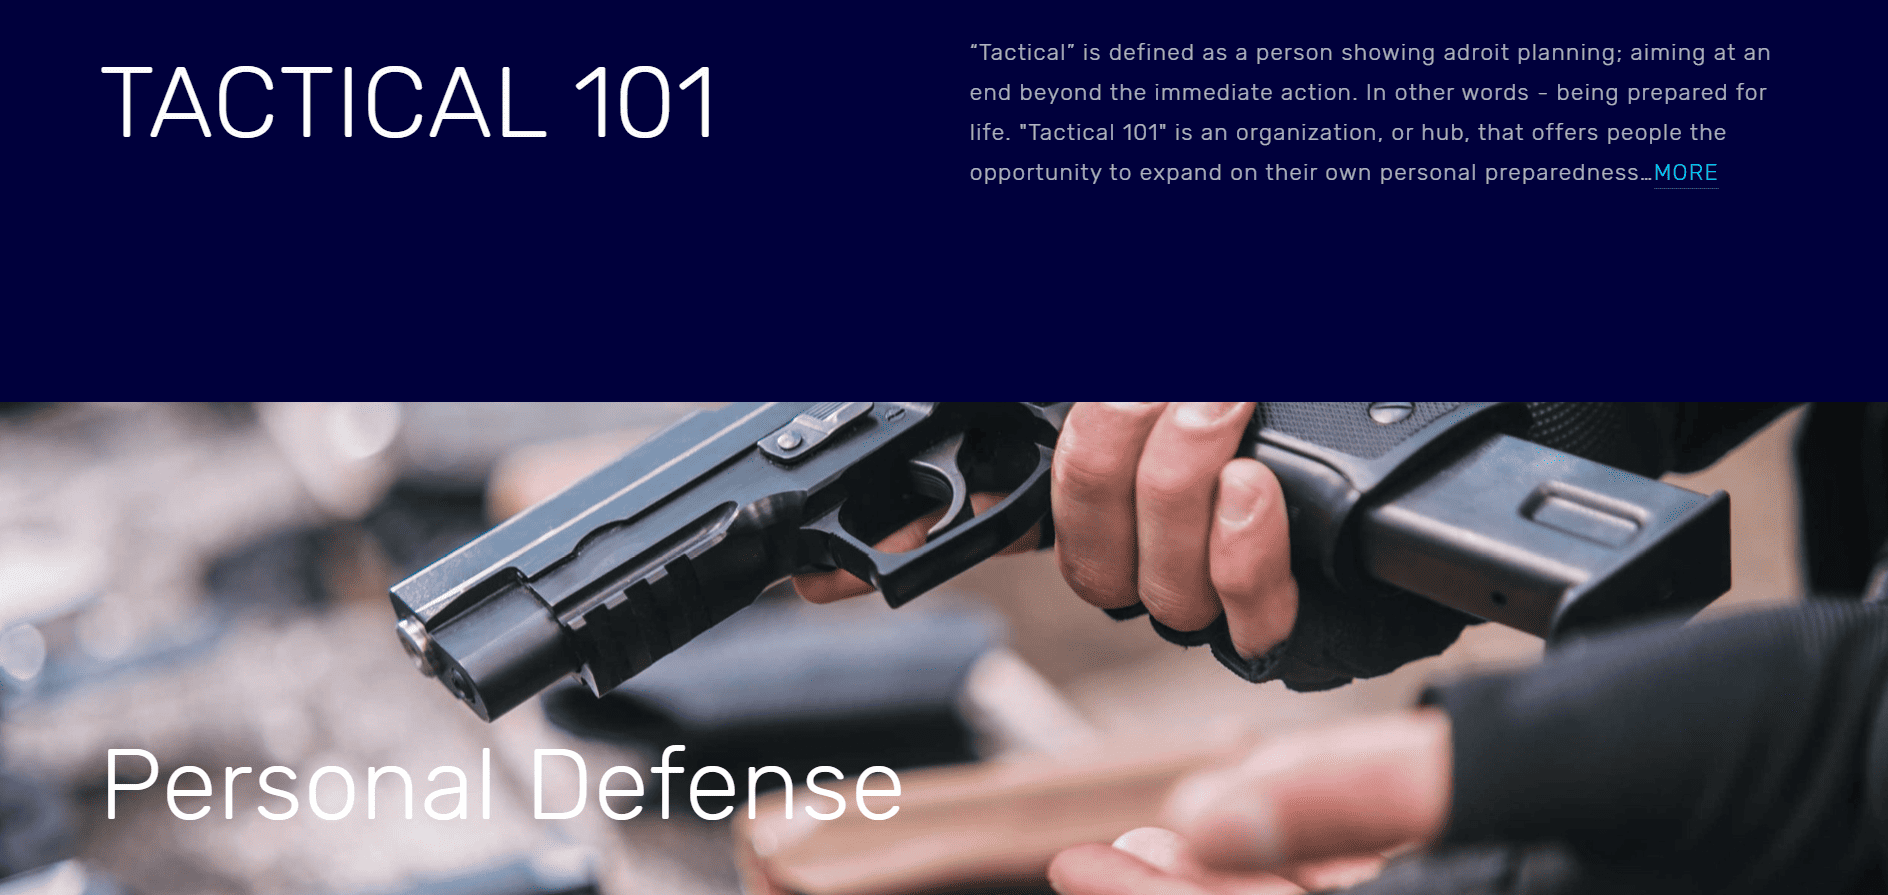 Tactical 101 by Tier 1 Creative